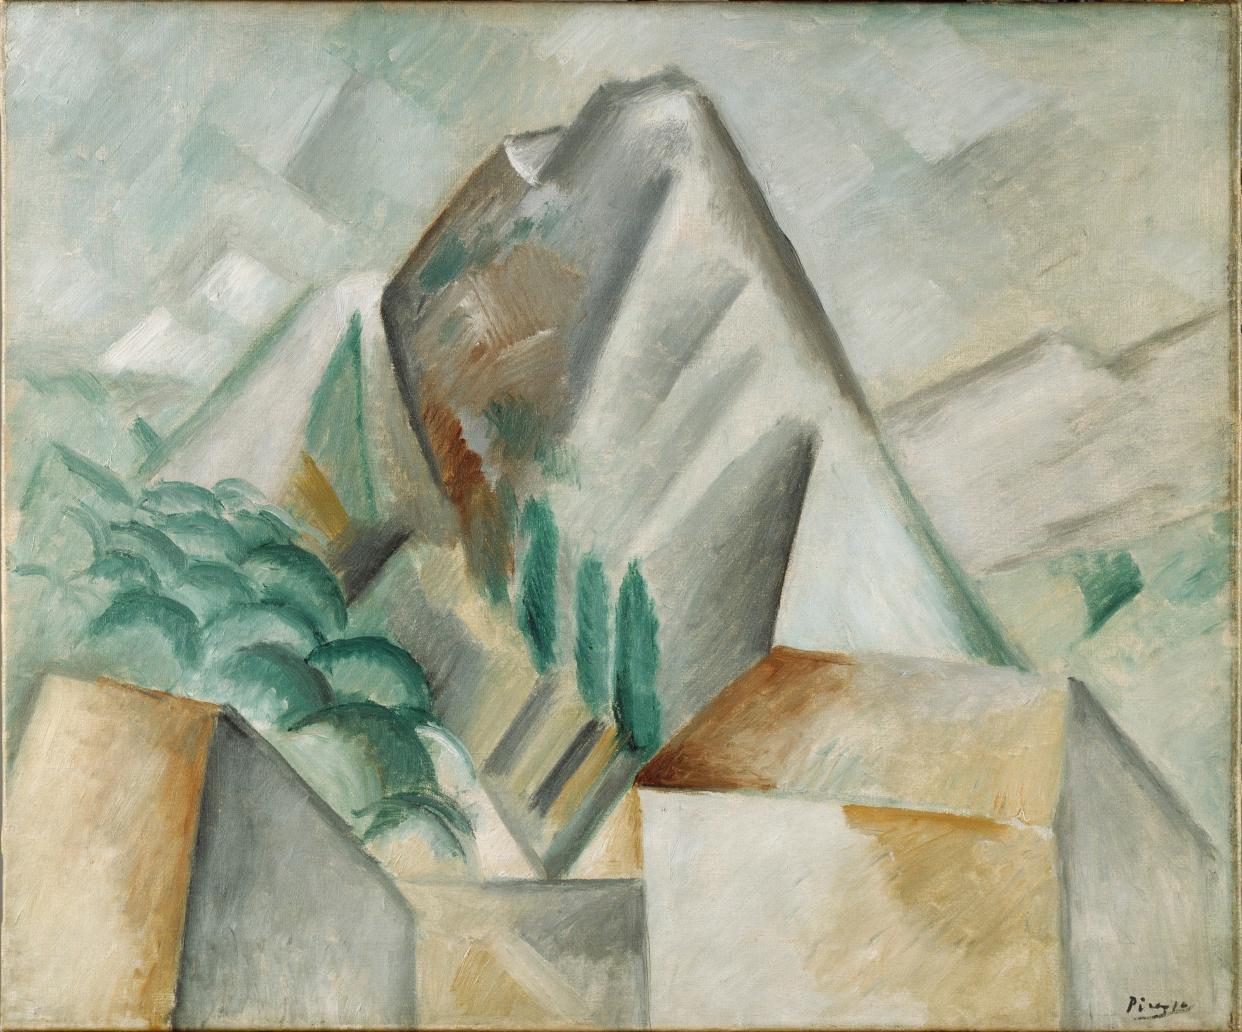 Pablo Picasso, Spanish, (1881-1973), Landscape, Horta de Ebro, early summer 1909. oil on canvas. 21 ¼ x 25 9/16 in. Denver Art Museum, Collection: The Charles Francis Hendrie Memorial Collection, Inv. 1966.